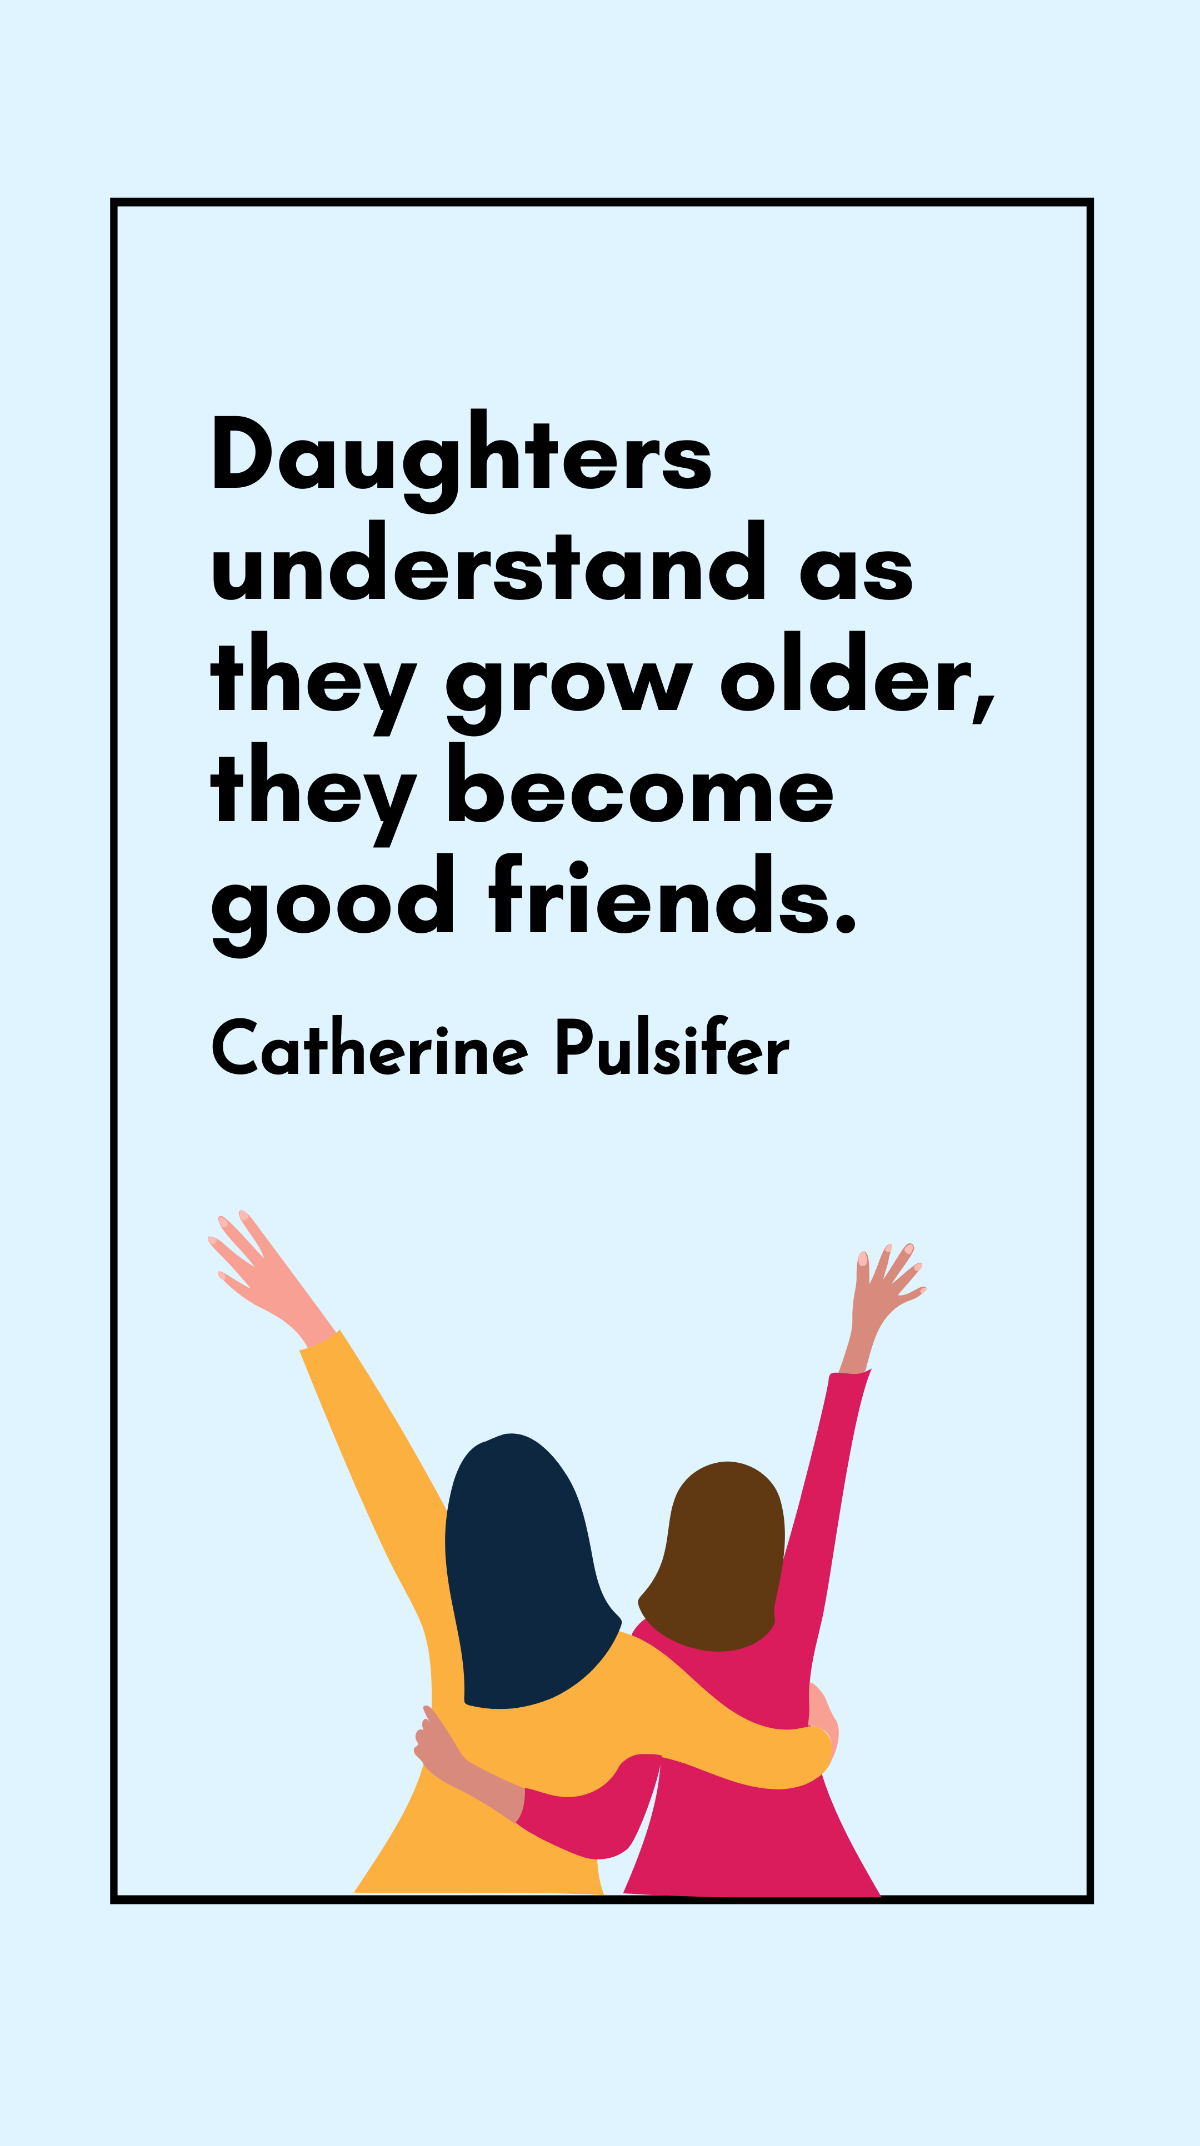 Free Catherine Pulsifer - Daughters understand as they grow older, they become good friends. Template